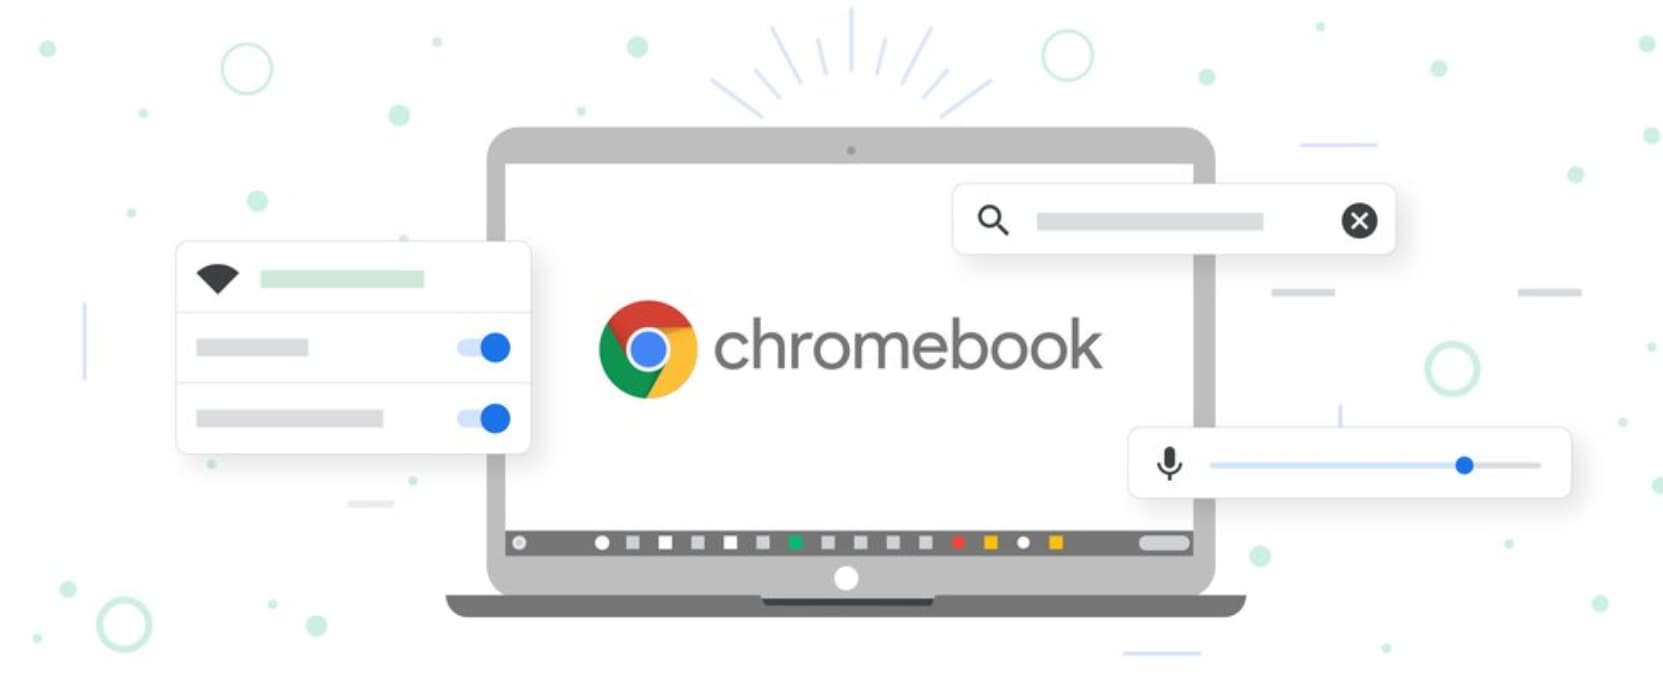 Chrome OS 85 Stable Channel arrives: Here’s what you need to know